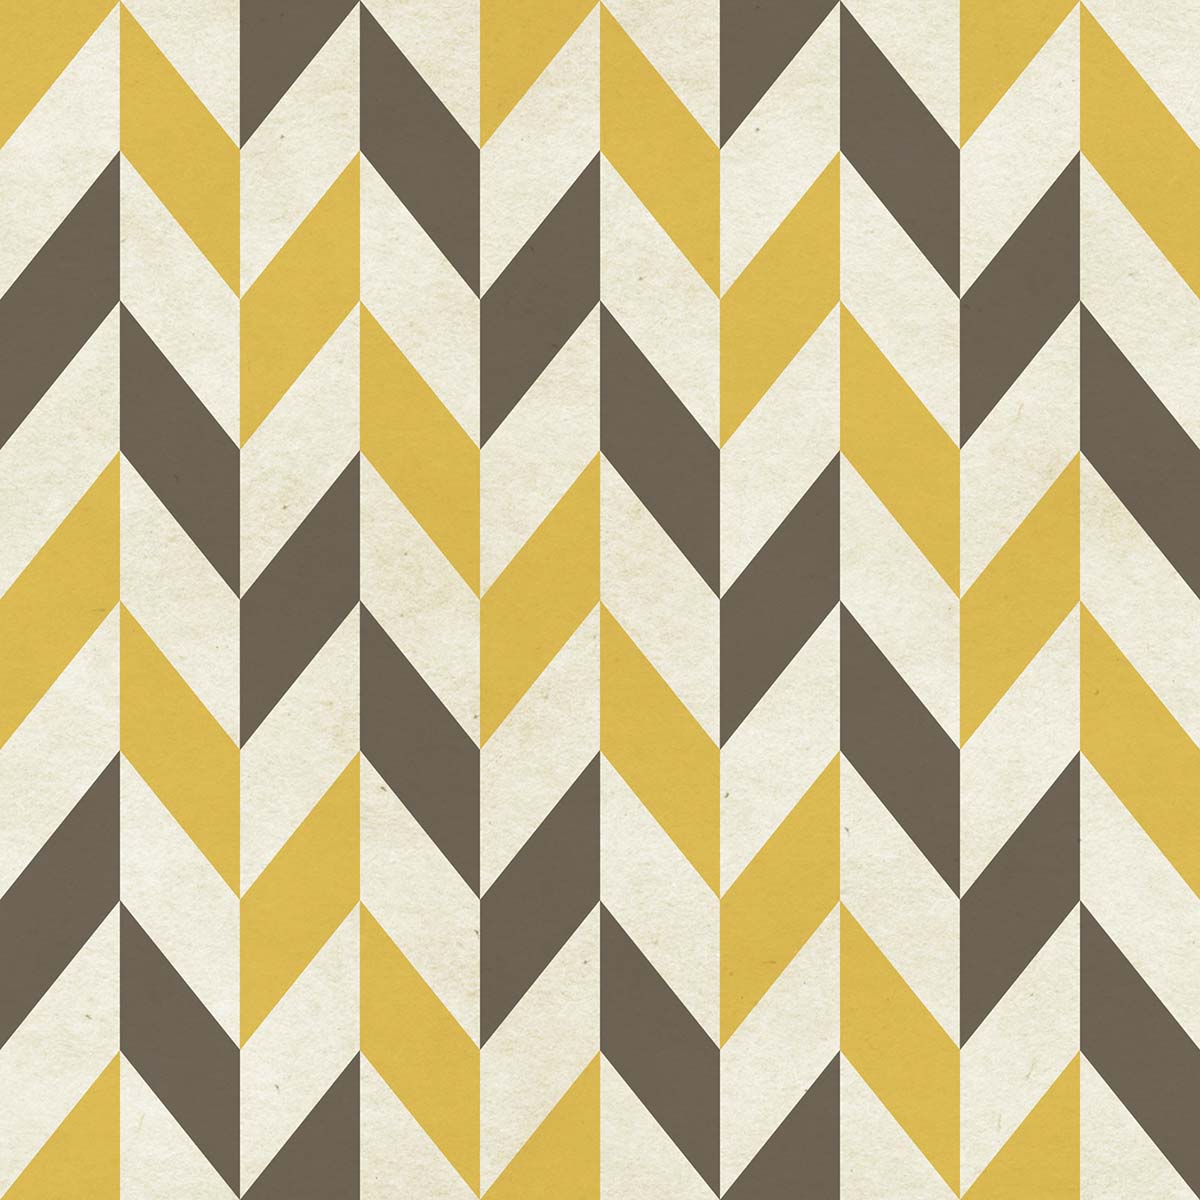 A pattern of yellow and grey chevrons